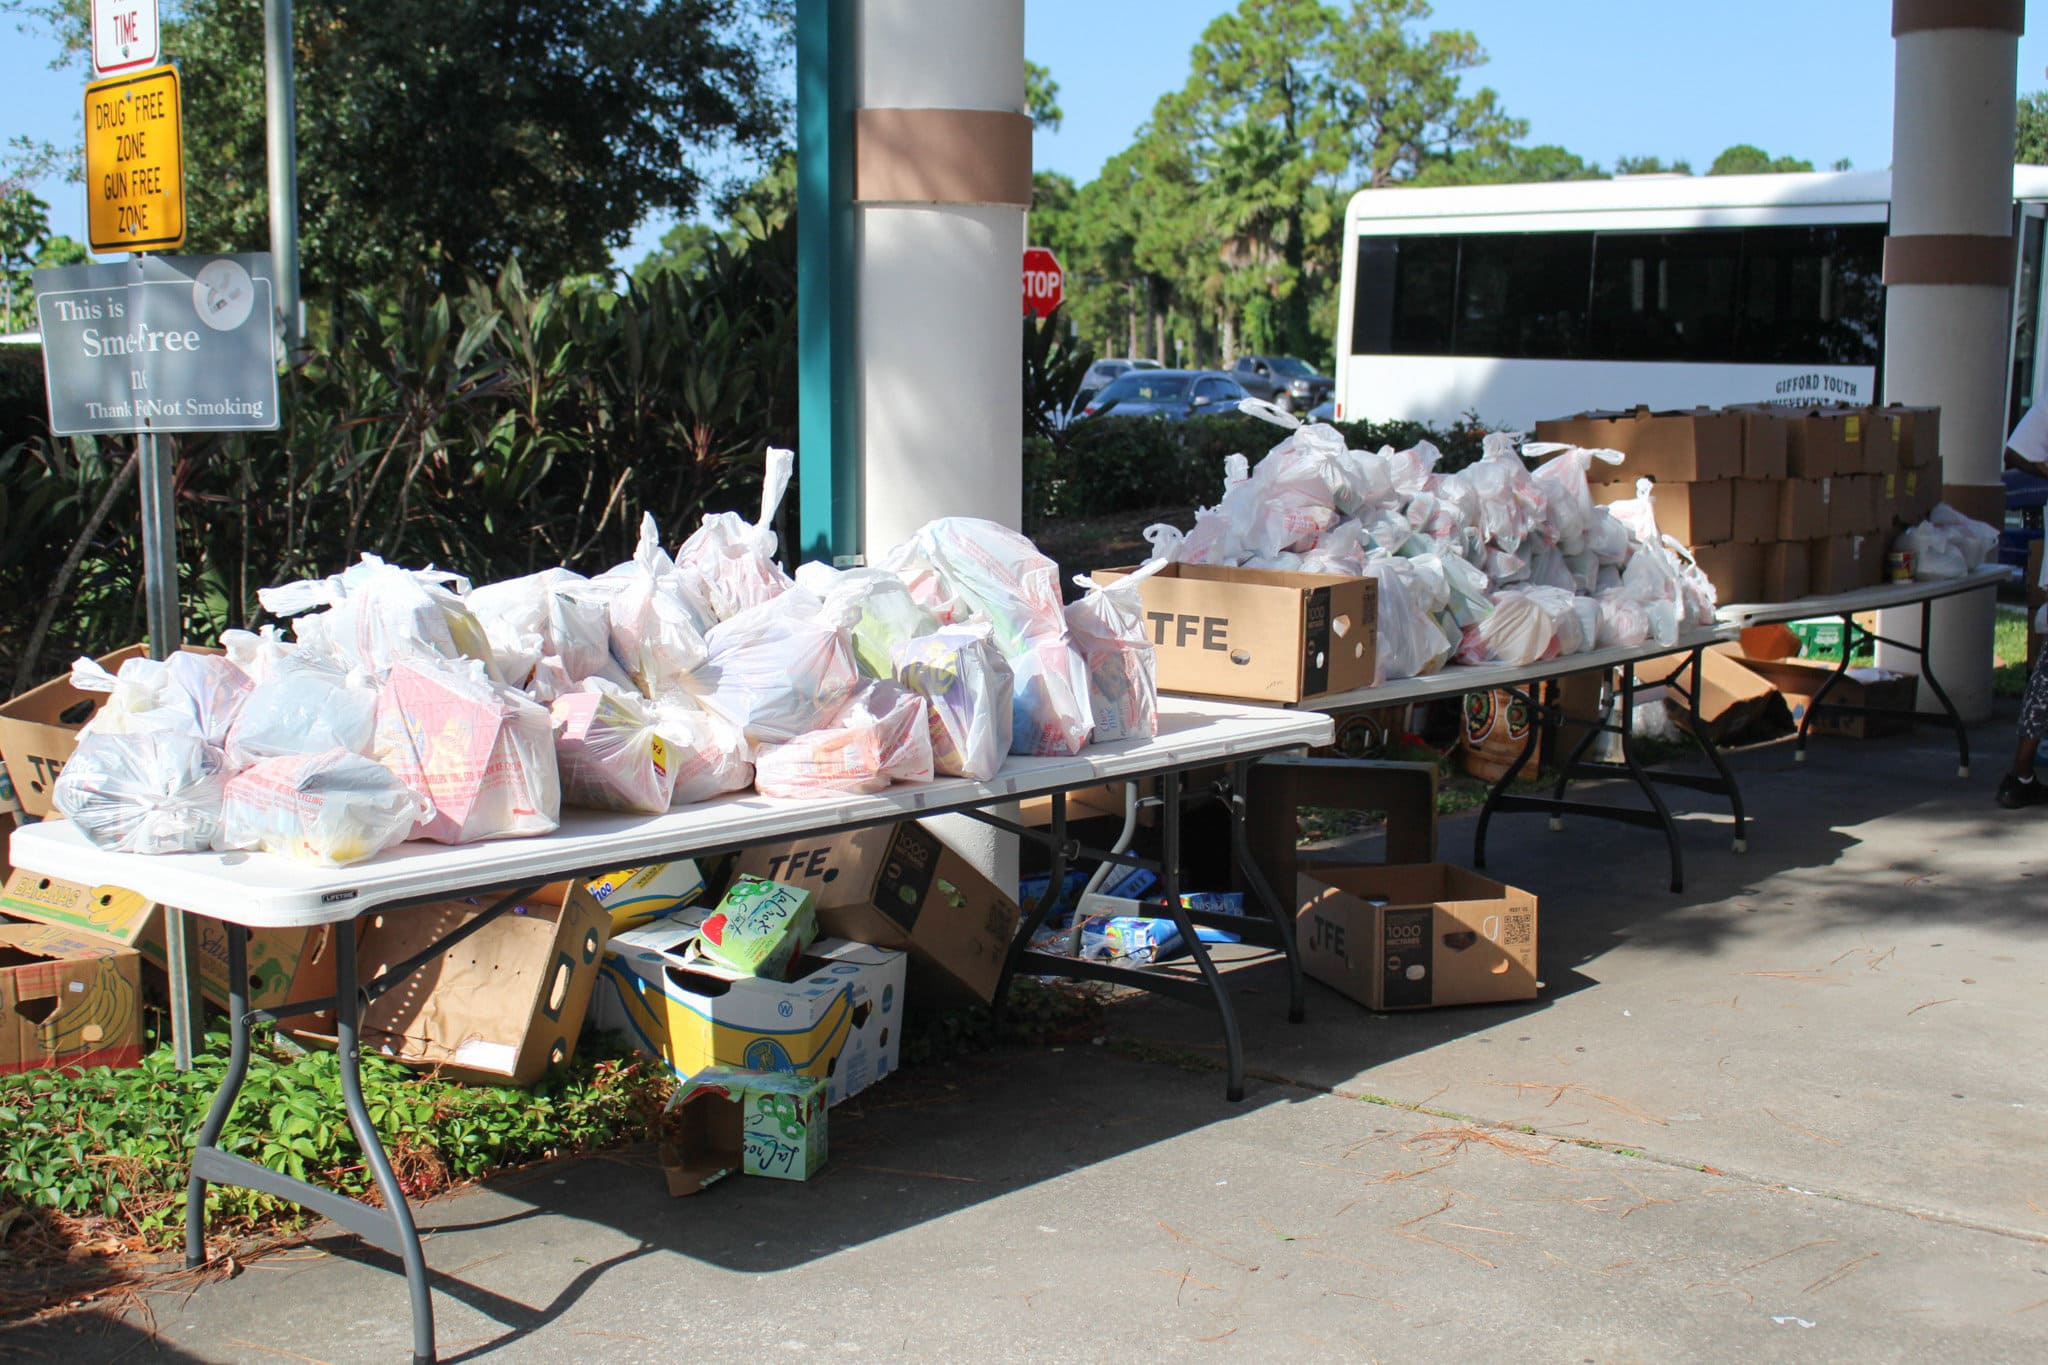 Food items in plastic bags displayed on table at GYAC's Mobile Food Pantry